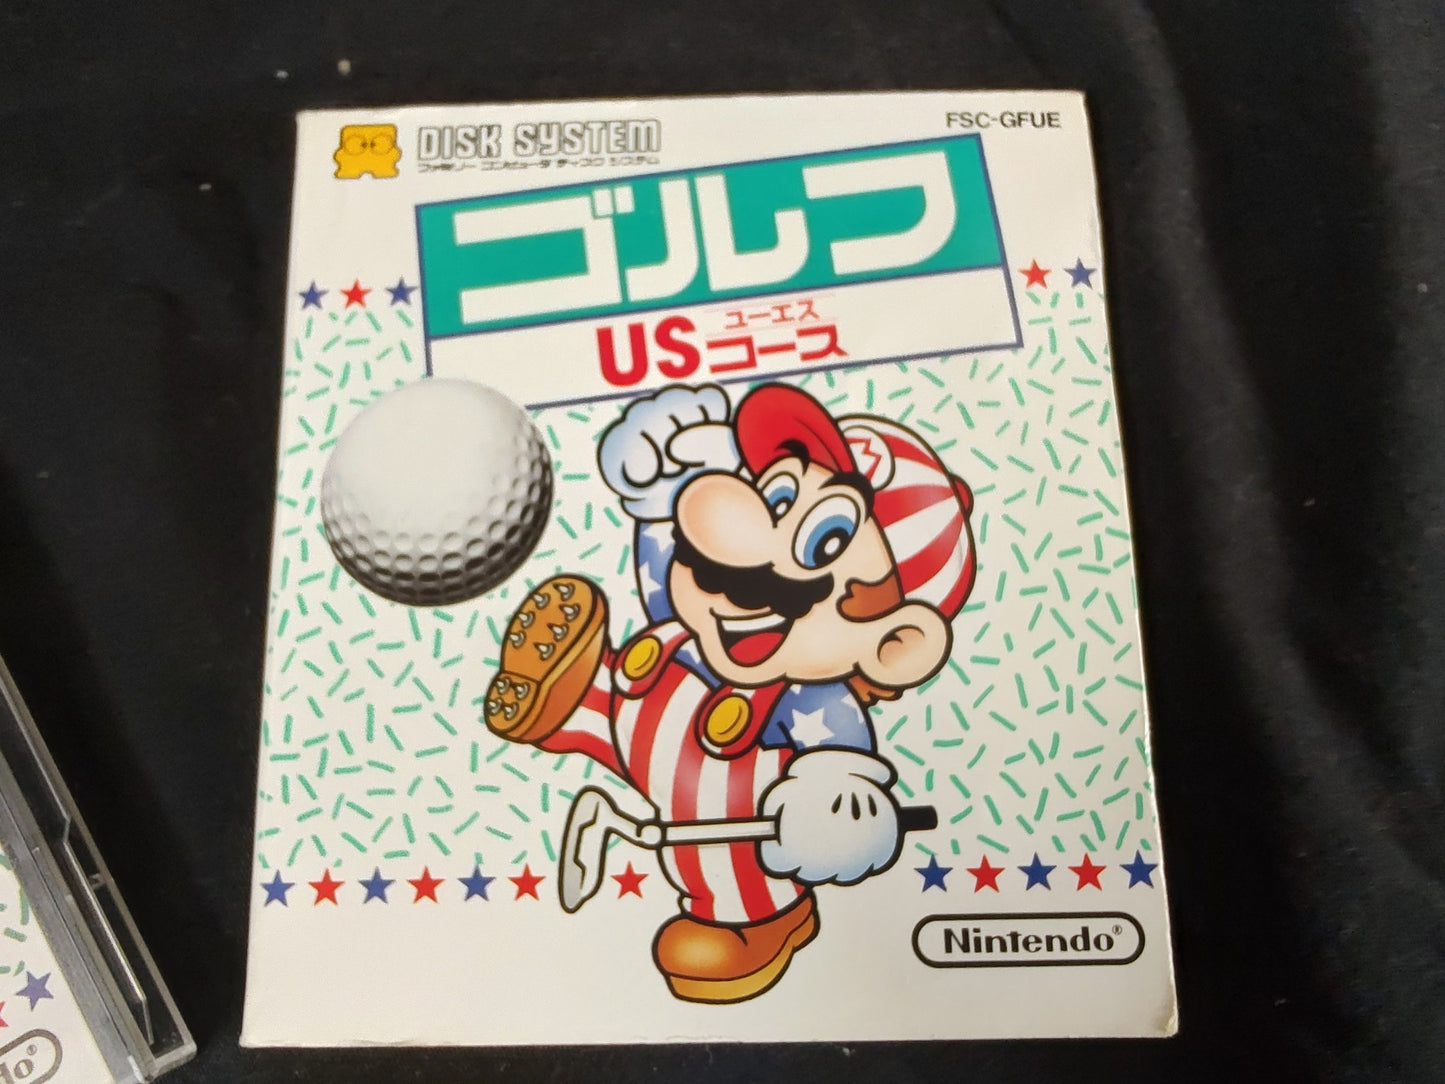 Mario Golf US Coruse (NES) Disk System, Game disk and box set, working-f0922-